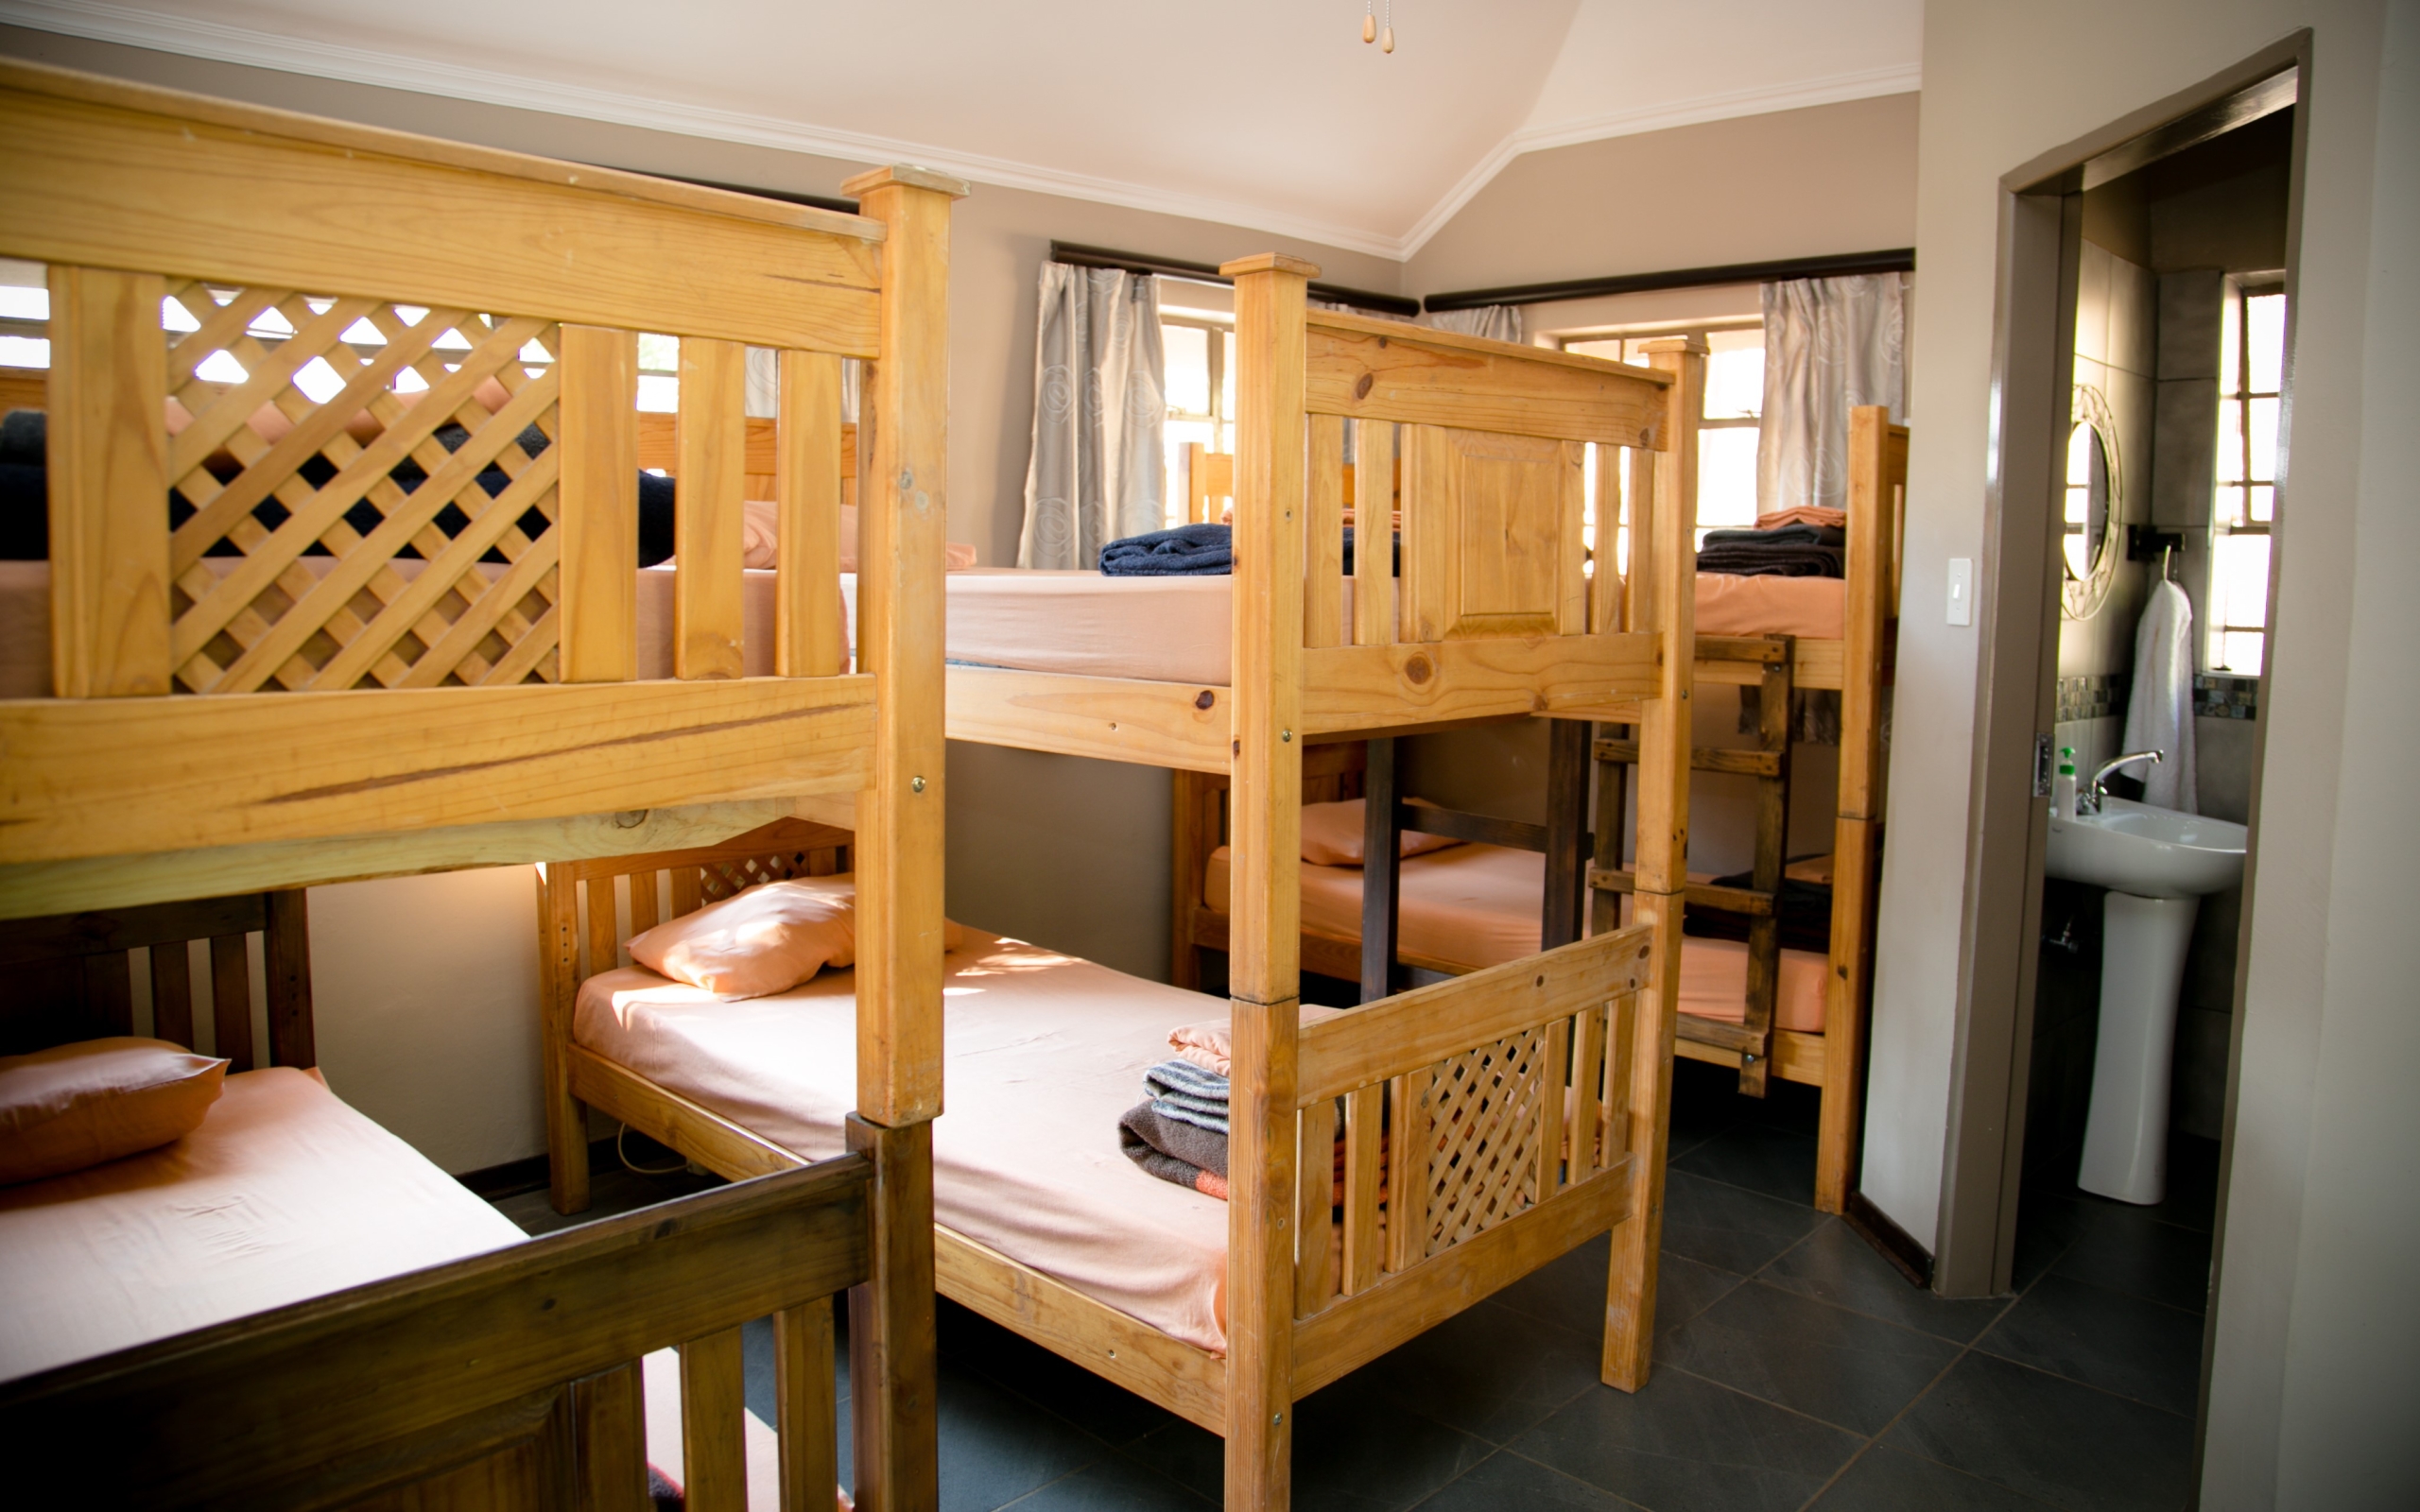 Lidwala Lodge dormitory-style rooms